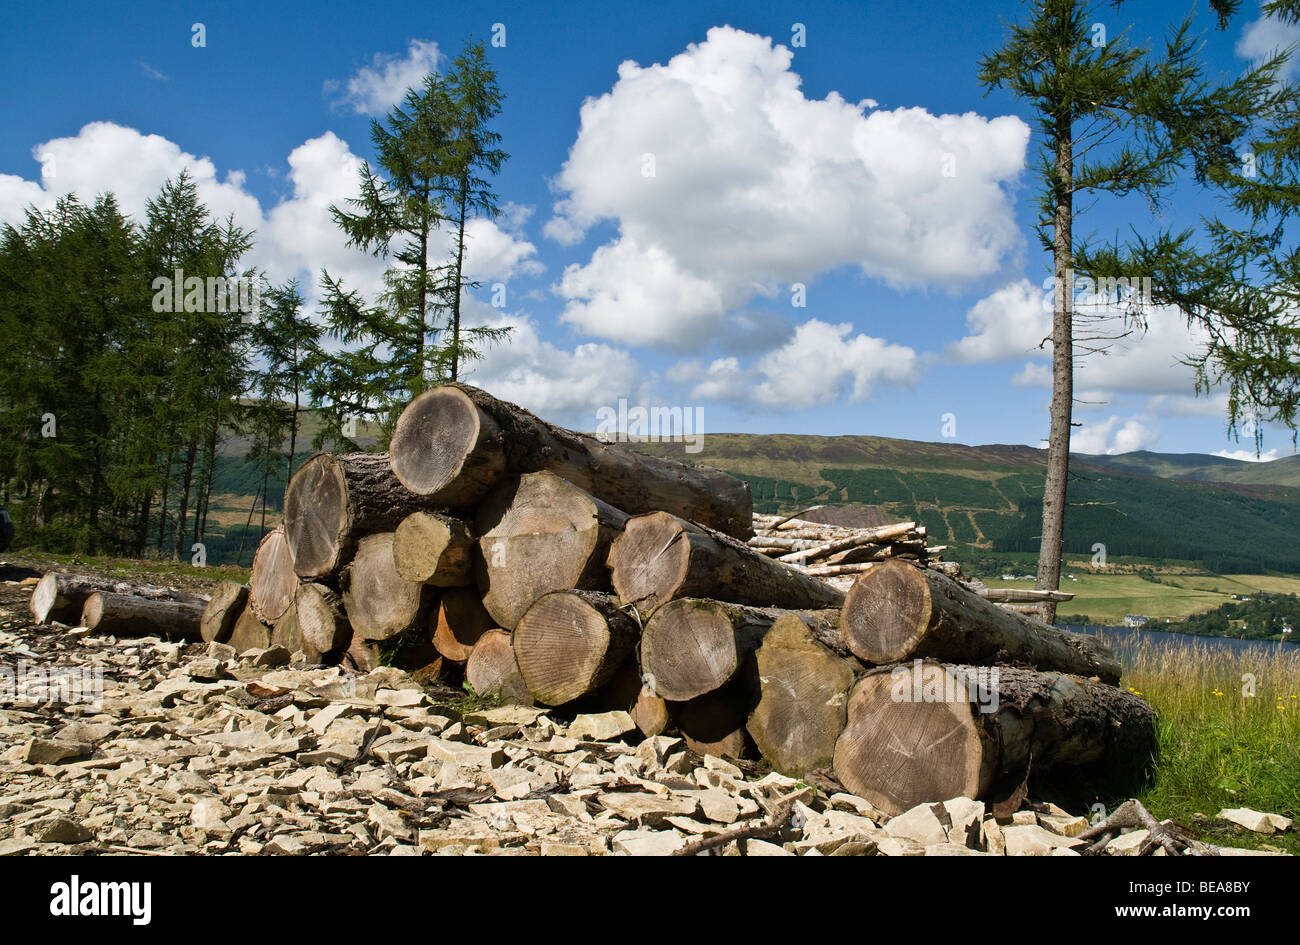 dh  LOCH TAY PERTHSHIRE Forestry tree trunks log pile felled forest scotland scottish clearing agroforestry uk Stock Photo